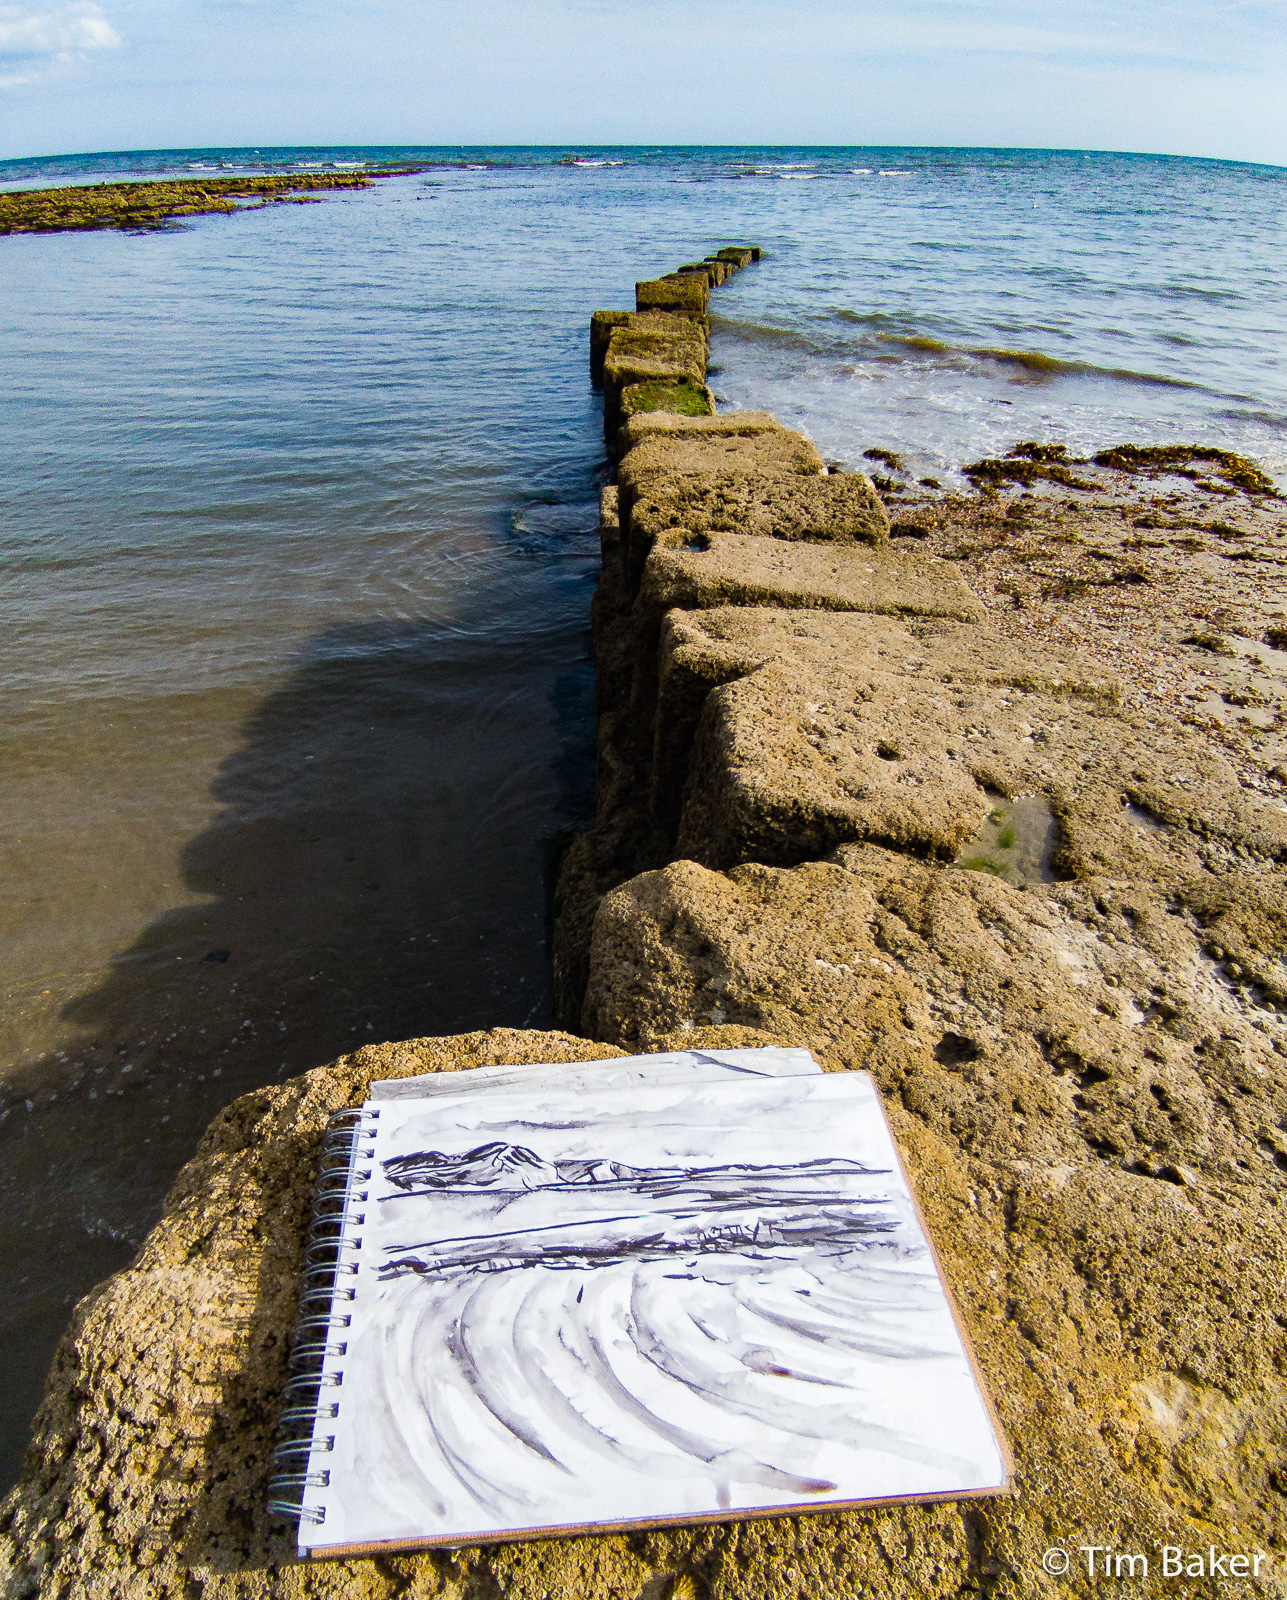 Drawing as the tide comes in, East Cliff, Lyme Regis